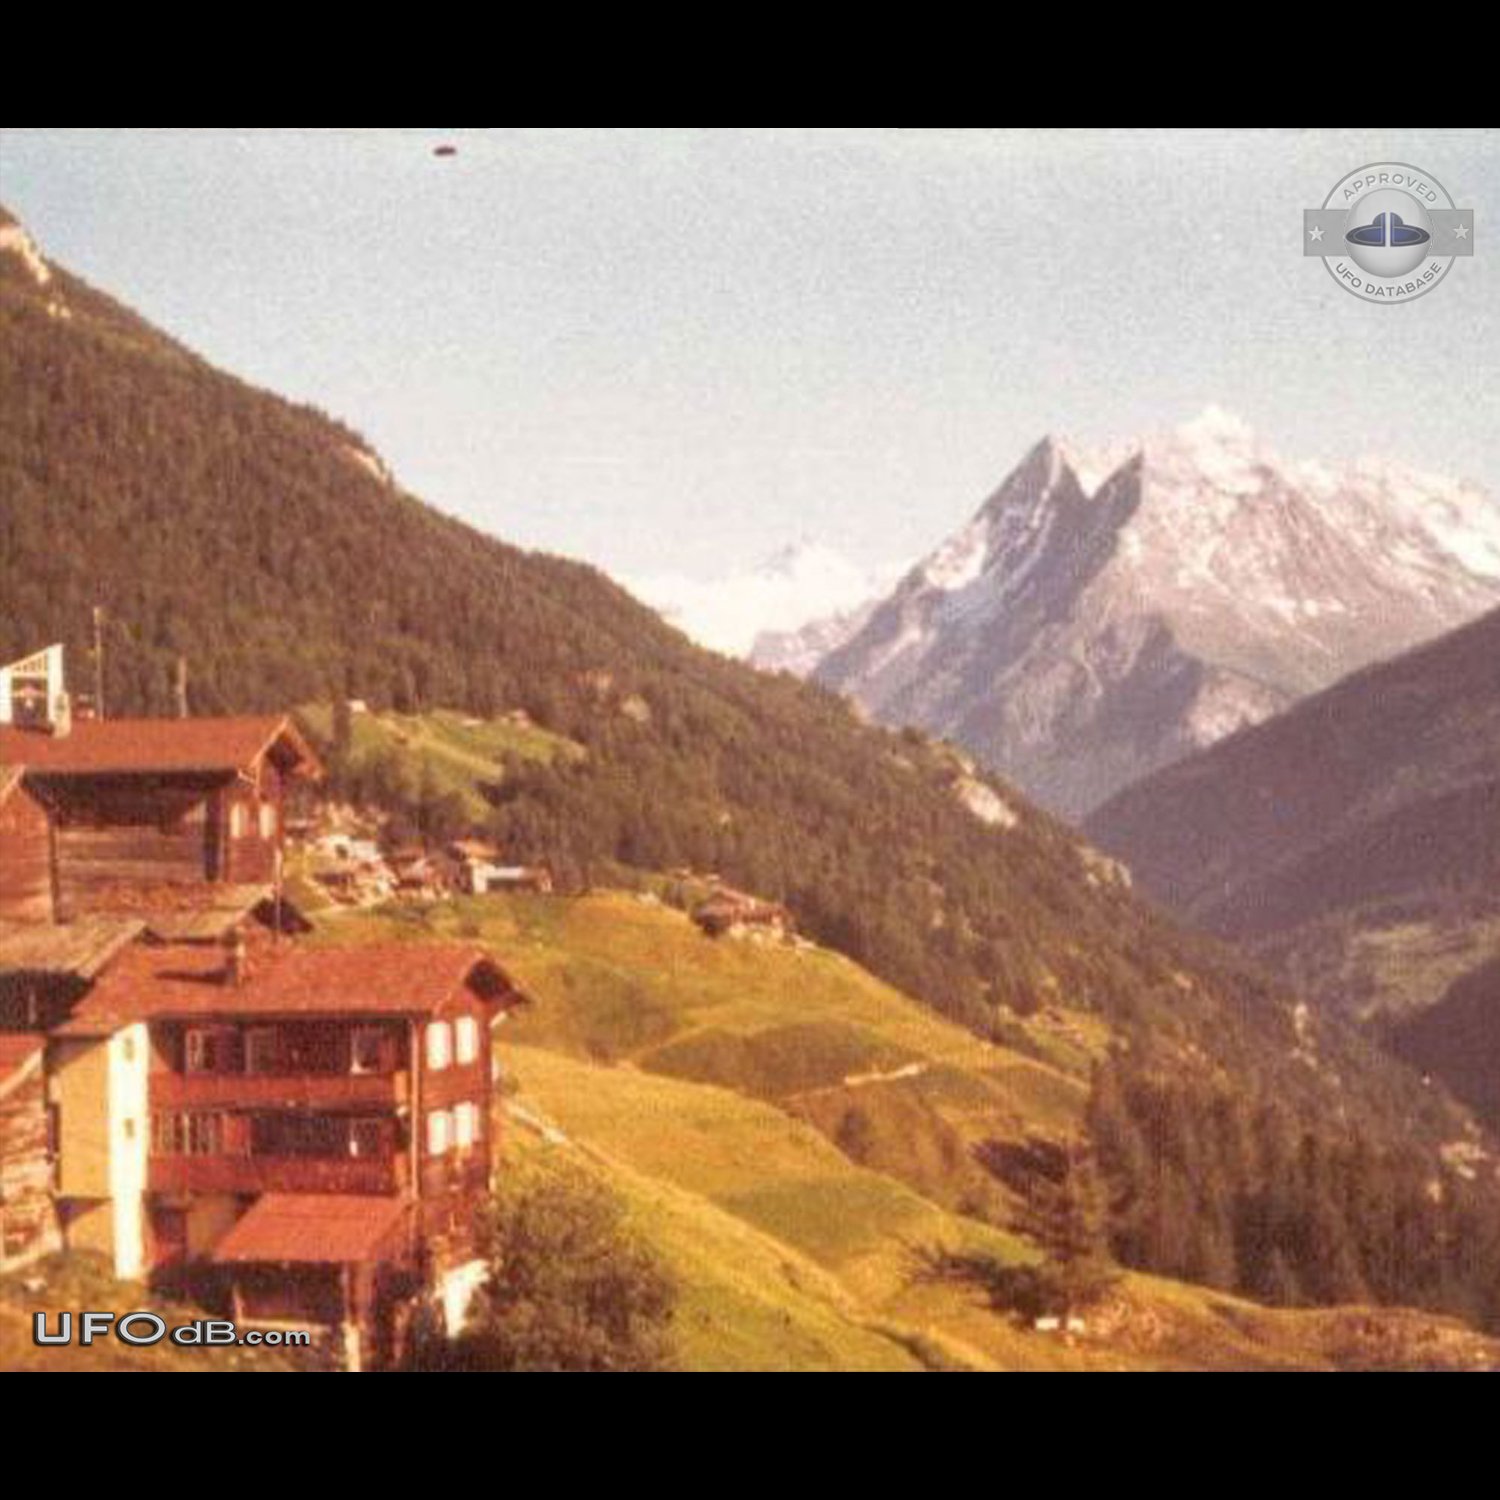 One of the Best UFO sighting backed by 2 UFO pictures Switzerland 1975 UFO Picture #459-6